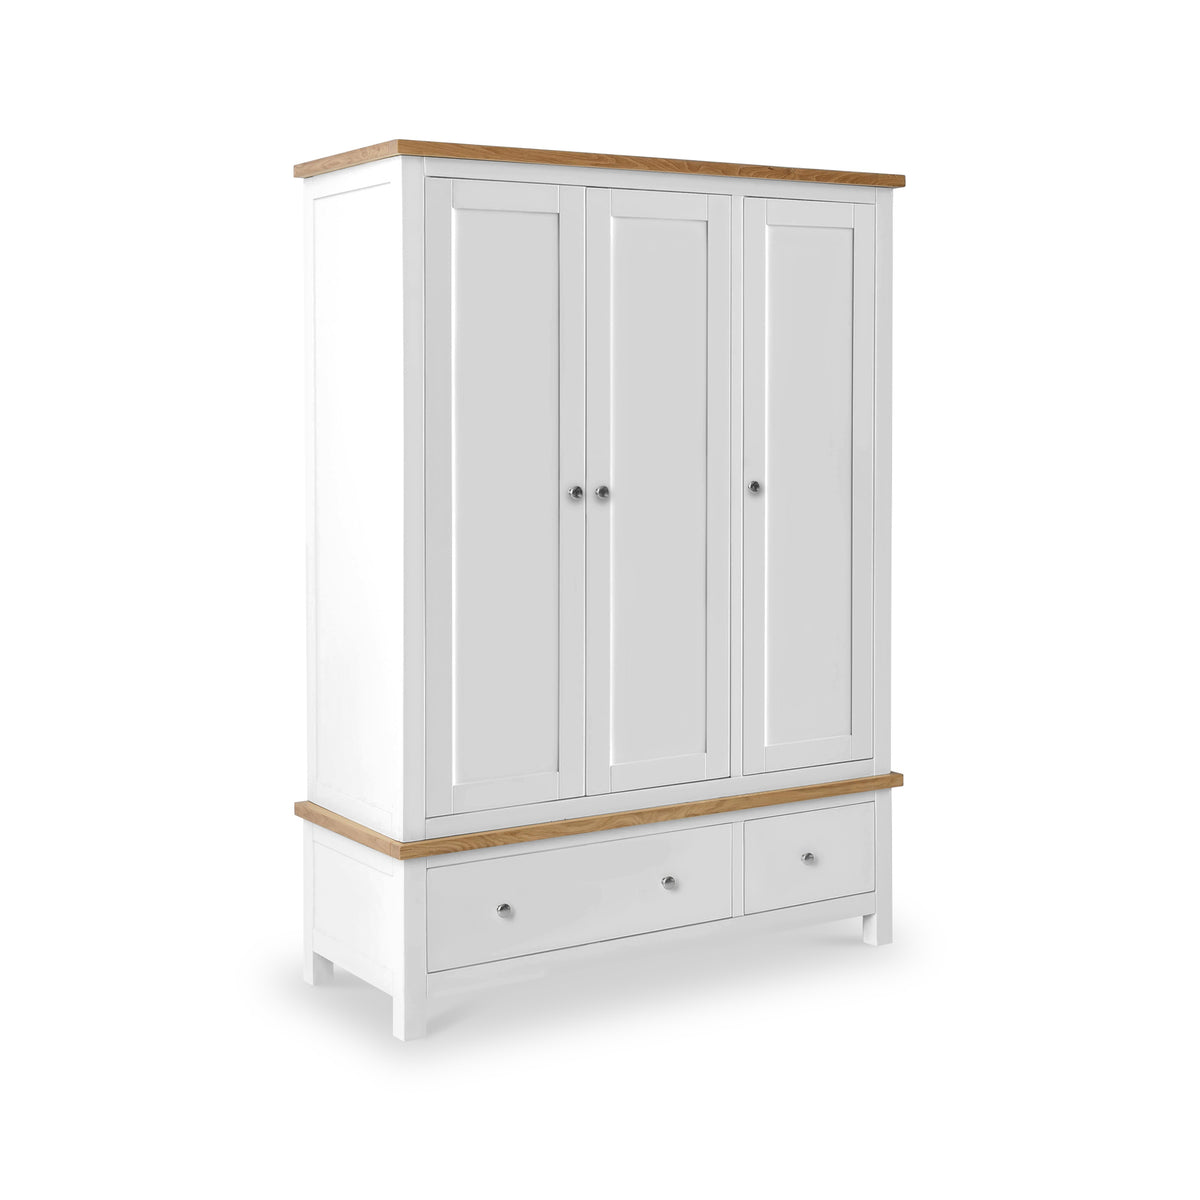 Farrow White Triple Wardrobe with Storage Drawers from Roseland Furniture